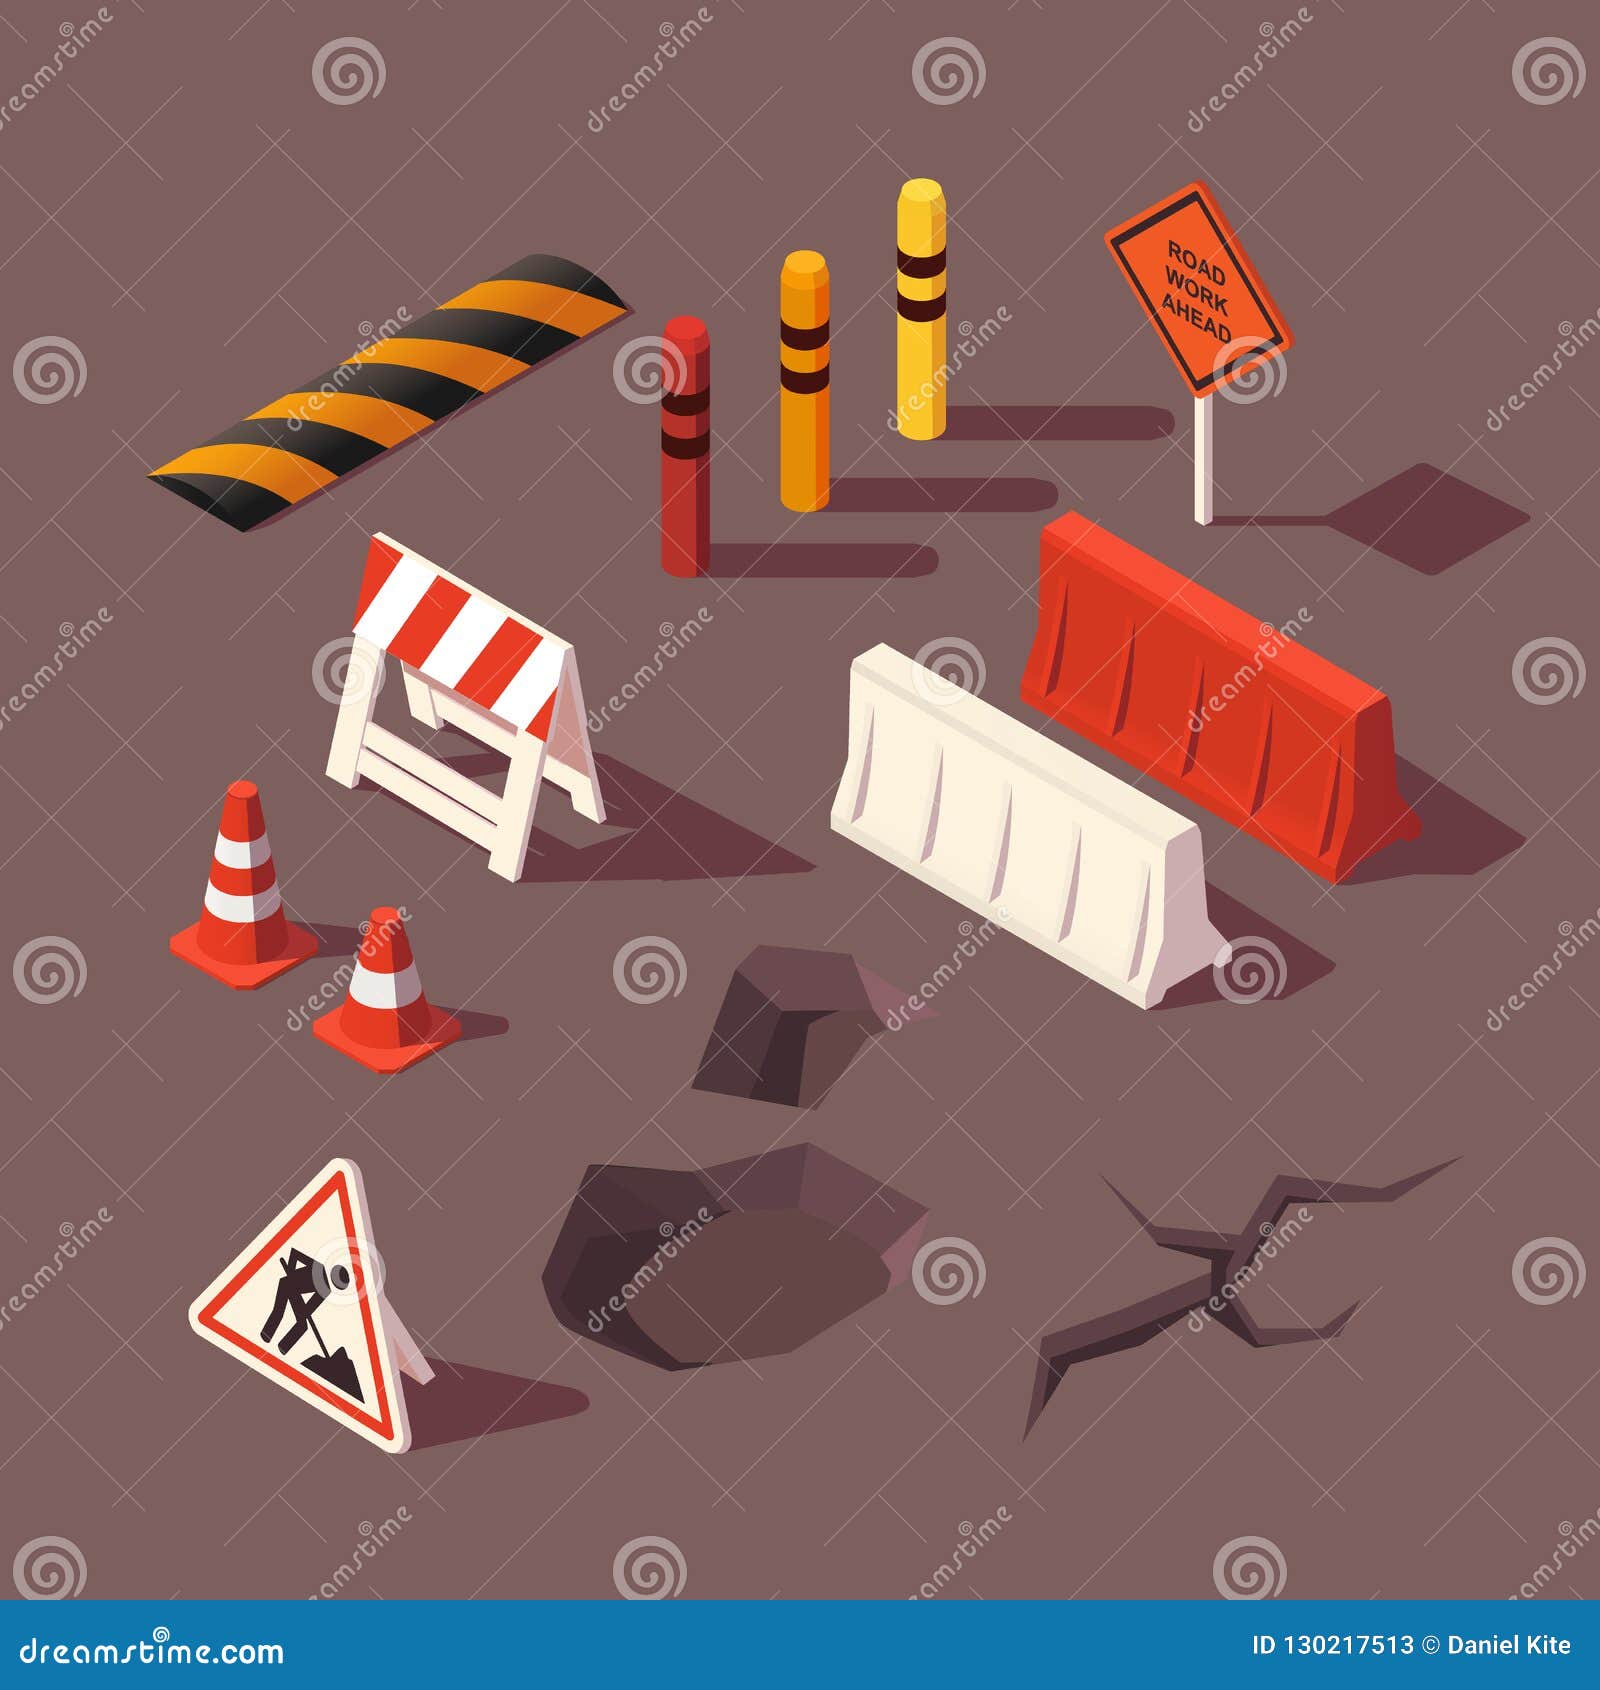 Isometric Set of Road Repair for Infographics. Road Work Ahead Sign ...